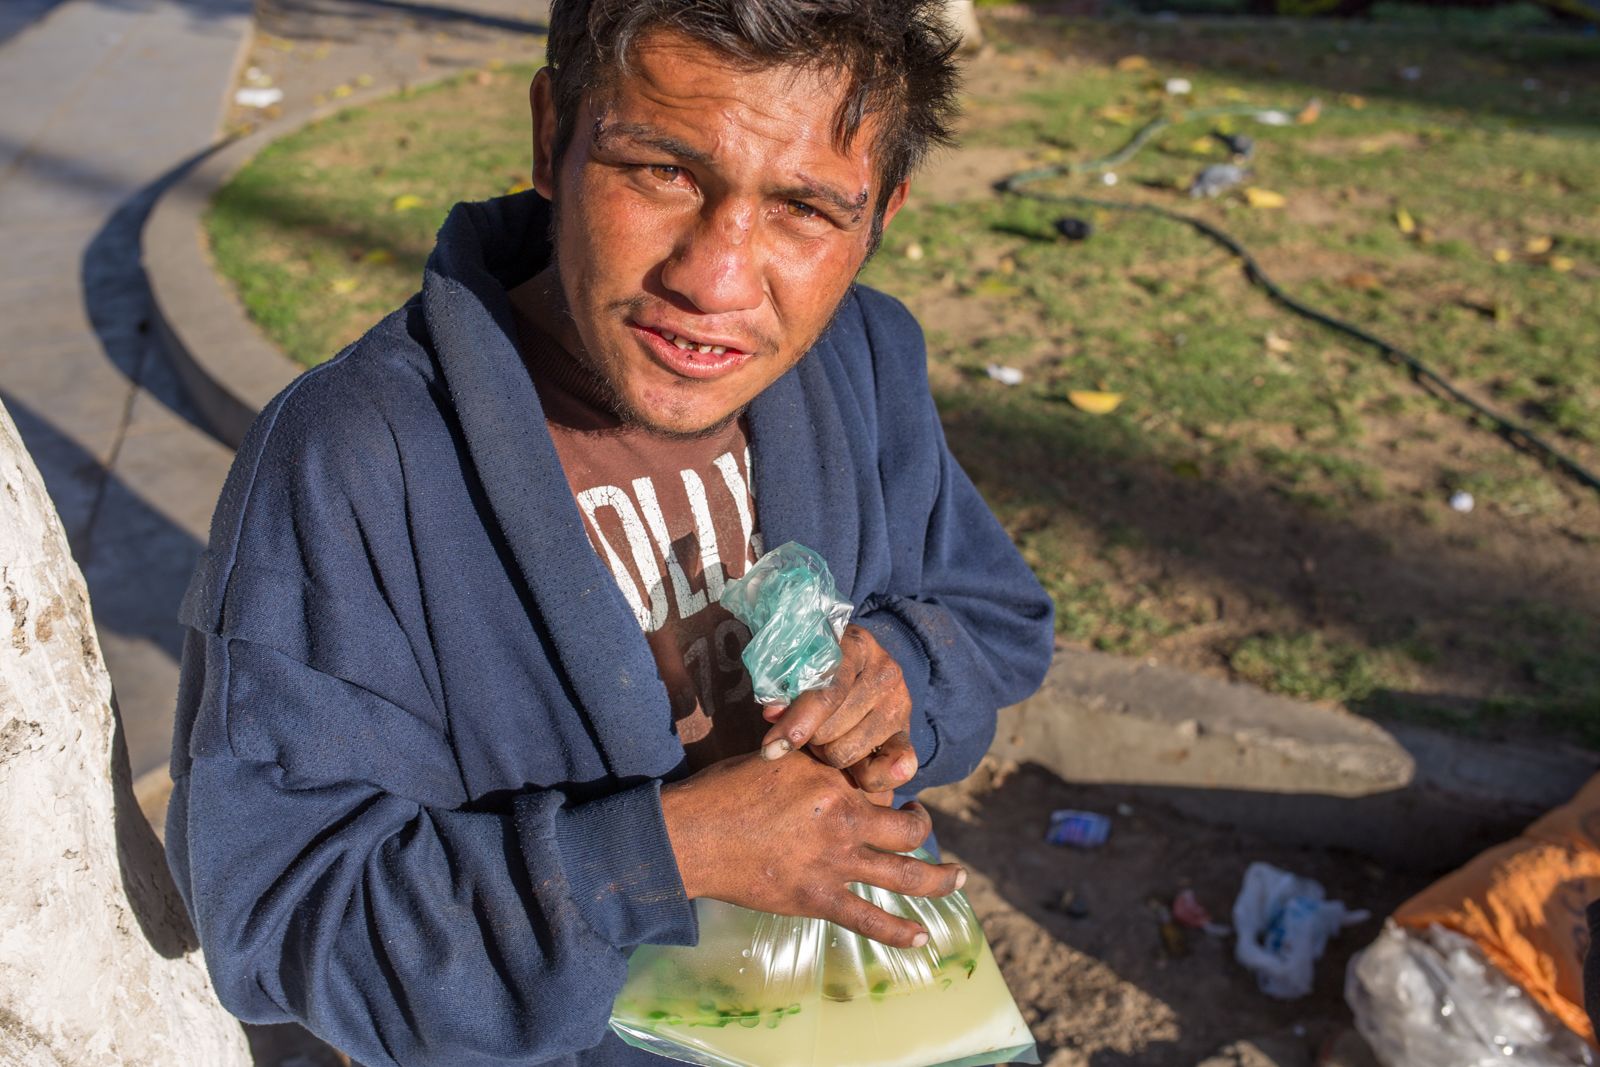 Jose Luis said he has been on the streets since age 13 and is now 22. He said he regularly inhales glue, or clefa. He said it makes him feel “bad,” but “I can’t change.” Image by Tracey Eaton. Bolivia, 2017.